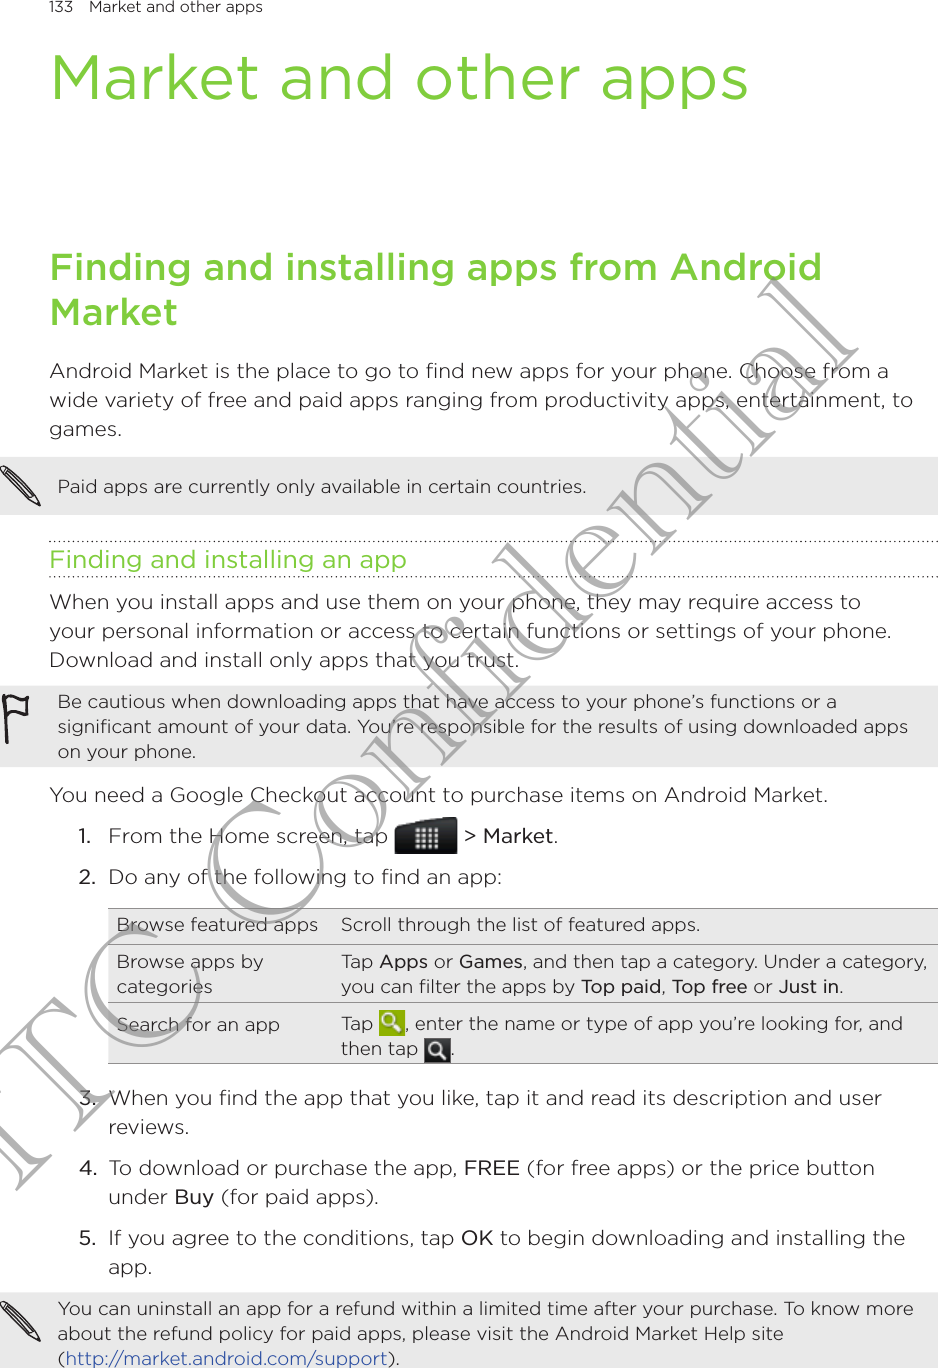 133  Market and other appsMarket and other appsFinding and installing apps from Android MarketAndroid Market is the place to go to find new apps for your phone. Choose from a wide variety of free and paid apps ranging from productivity apps, entertainment, to games.Paid apps are currently only available in certain countries.Finding and installing an appWhen you install apps and use them on your phone, they may require access to your personal information or access to certain functions or settings of your phone. Download and install only apps that you trust.Be cautious when downloading apps that have access to your phone’s functions or a significant amount of your data. You’re responsible for the results of using downloaded apps on your phone.You need a Google Checkout account to purchase items on Android Market.1.  From the Home screen, tap  &gt; Market.2.  Do any of the following to find an app:Browse featured apps Scroll through the list of featured apps.Browse apps by categoriesTap Apps or Games, and then tap a category. Under a category, you can filter the apps by Top paid, Top free or Just in.Search for an app Tap  , enter the name or type of app you’re looking for, and then tap  .3.  When you find the app that you like, tap it and read its description and user reviews.4.  To download or purchase the app, FREE (for free apps) or the price button under Buy (for paid apps).5.  If you agree to the conditions, tap OK to begin downloading and installing the app.You can uninstall an app for a refund within a limited time after your purchase. To know more about the refund policy for paid apps, please visit the Android Market Help site  (http://market.android.com/support).HTC Confidential